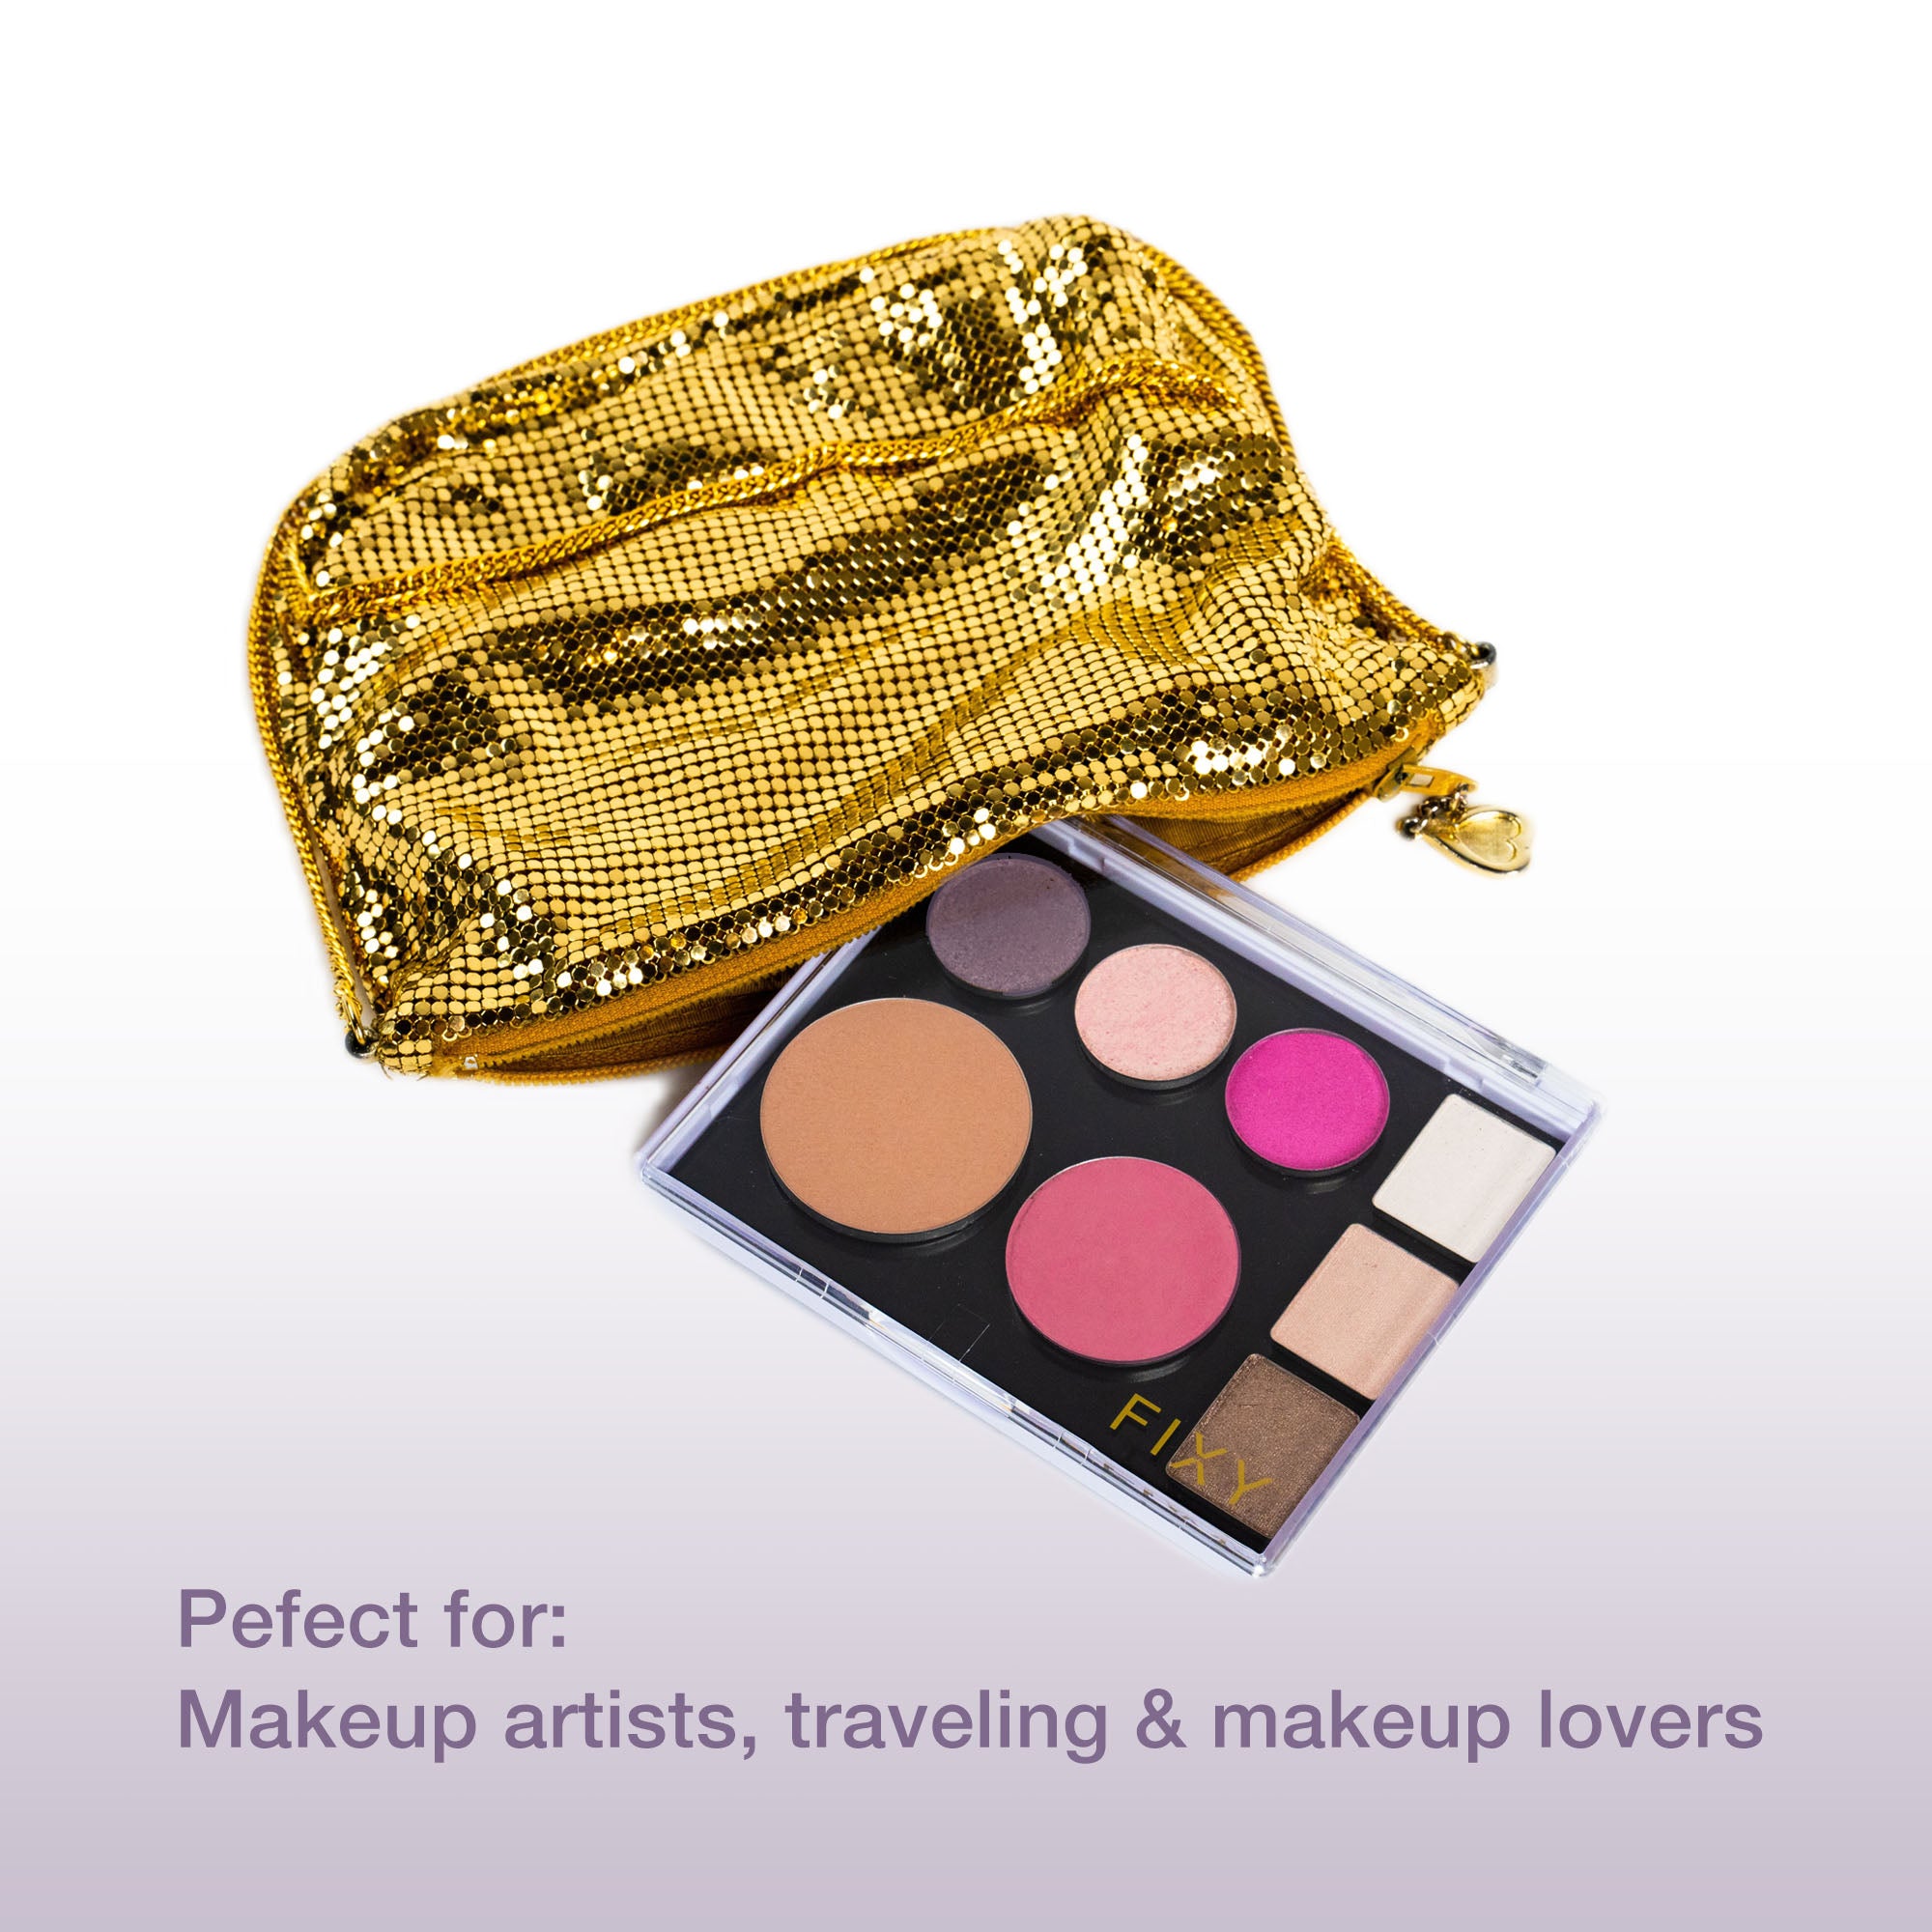 FIXY empty magnetic makeup palette customized with three medium eyeshadow pans, three small round eyeshadow pans, one large foundation pan, and a medium-sized blush pan, accompanied by a gold sequin hand bag, ideal for makeup artists, frequent travelers, and makeup lovers.